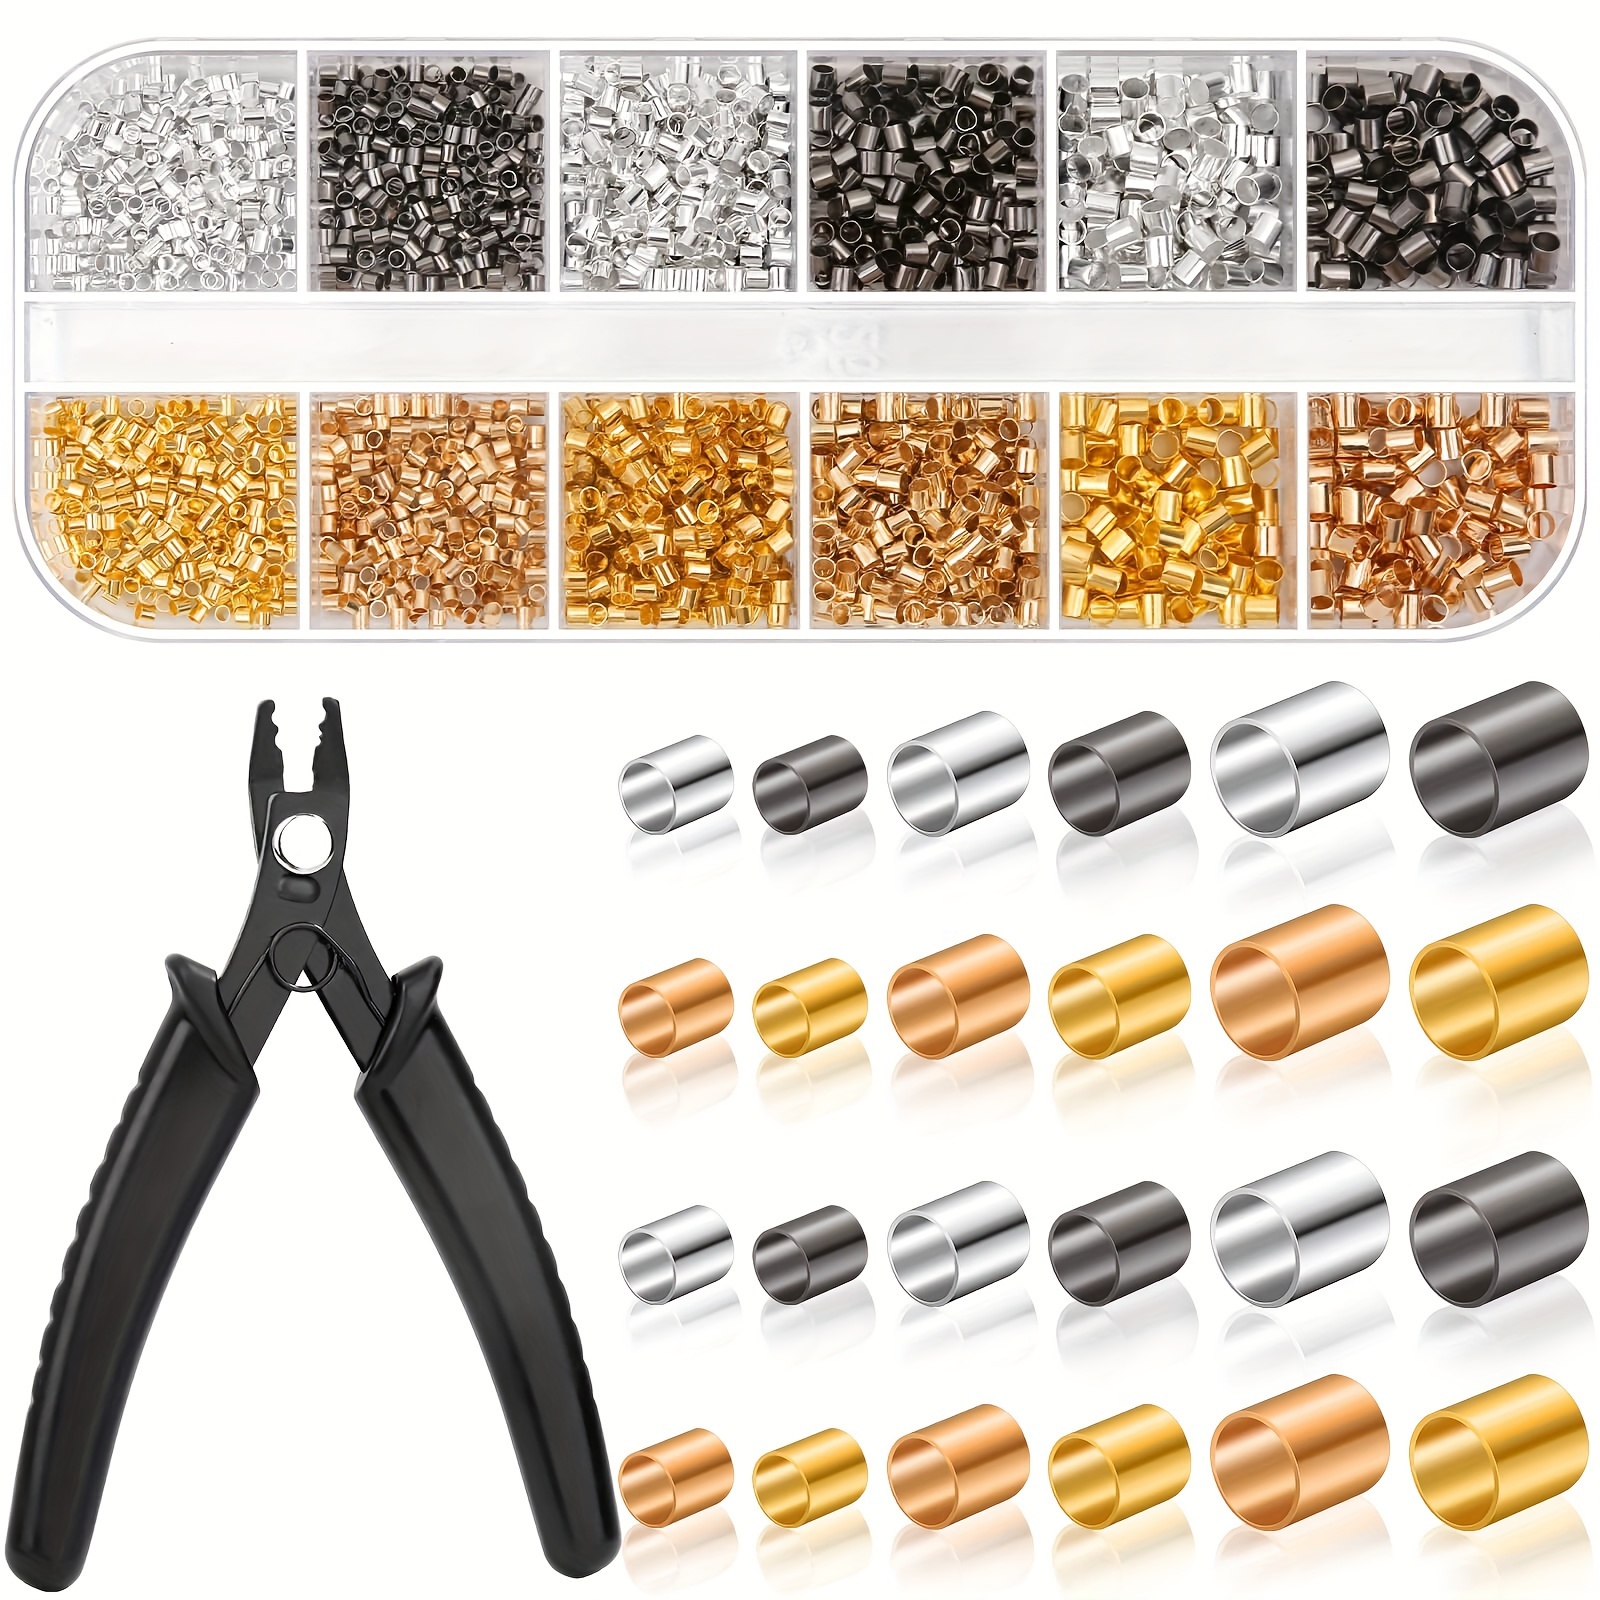 A Set Alloy Jewelry Making Kit Jewelry Making Tools Copper Wire Spacer  Beads Crimp Beads Earring Hooks Handmade Craft Supplies - Jewelry Findings  & Components - AliExpress